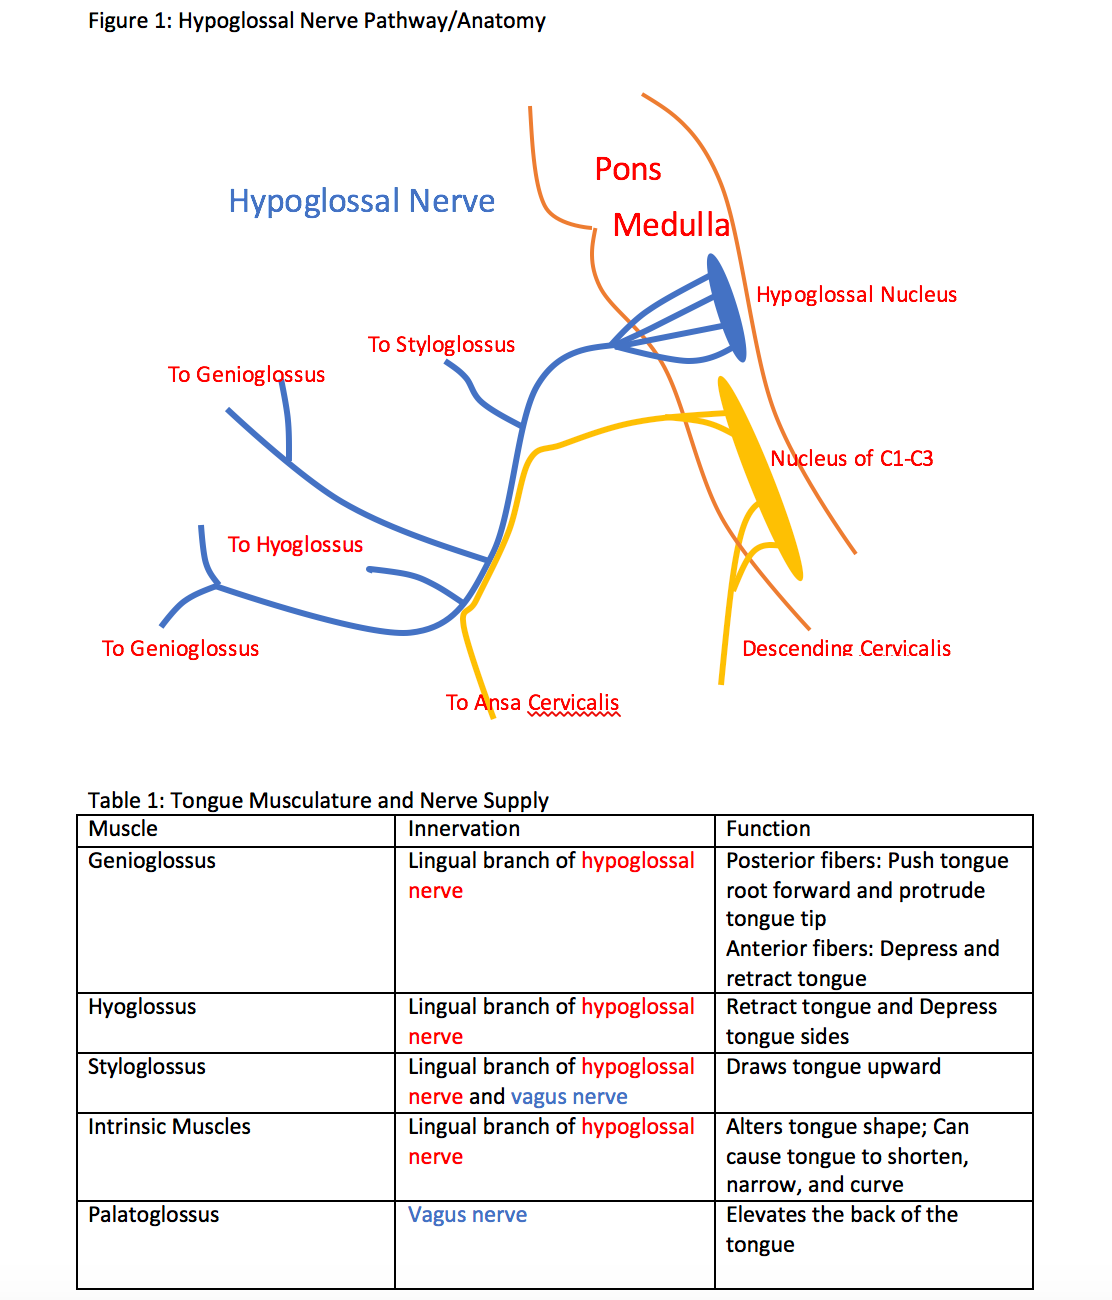 Figure 1: Hypoglossal Pathway/Anatomy
Table 1: Tongue Musculature and Nerve Supply